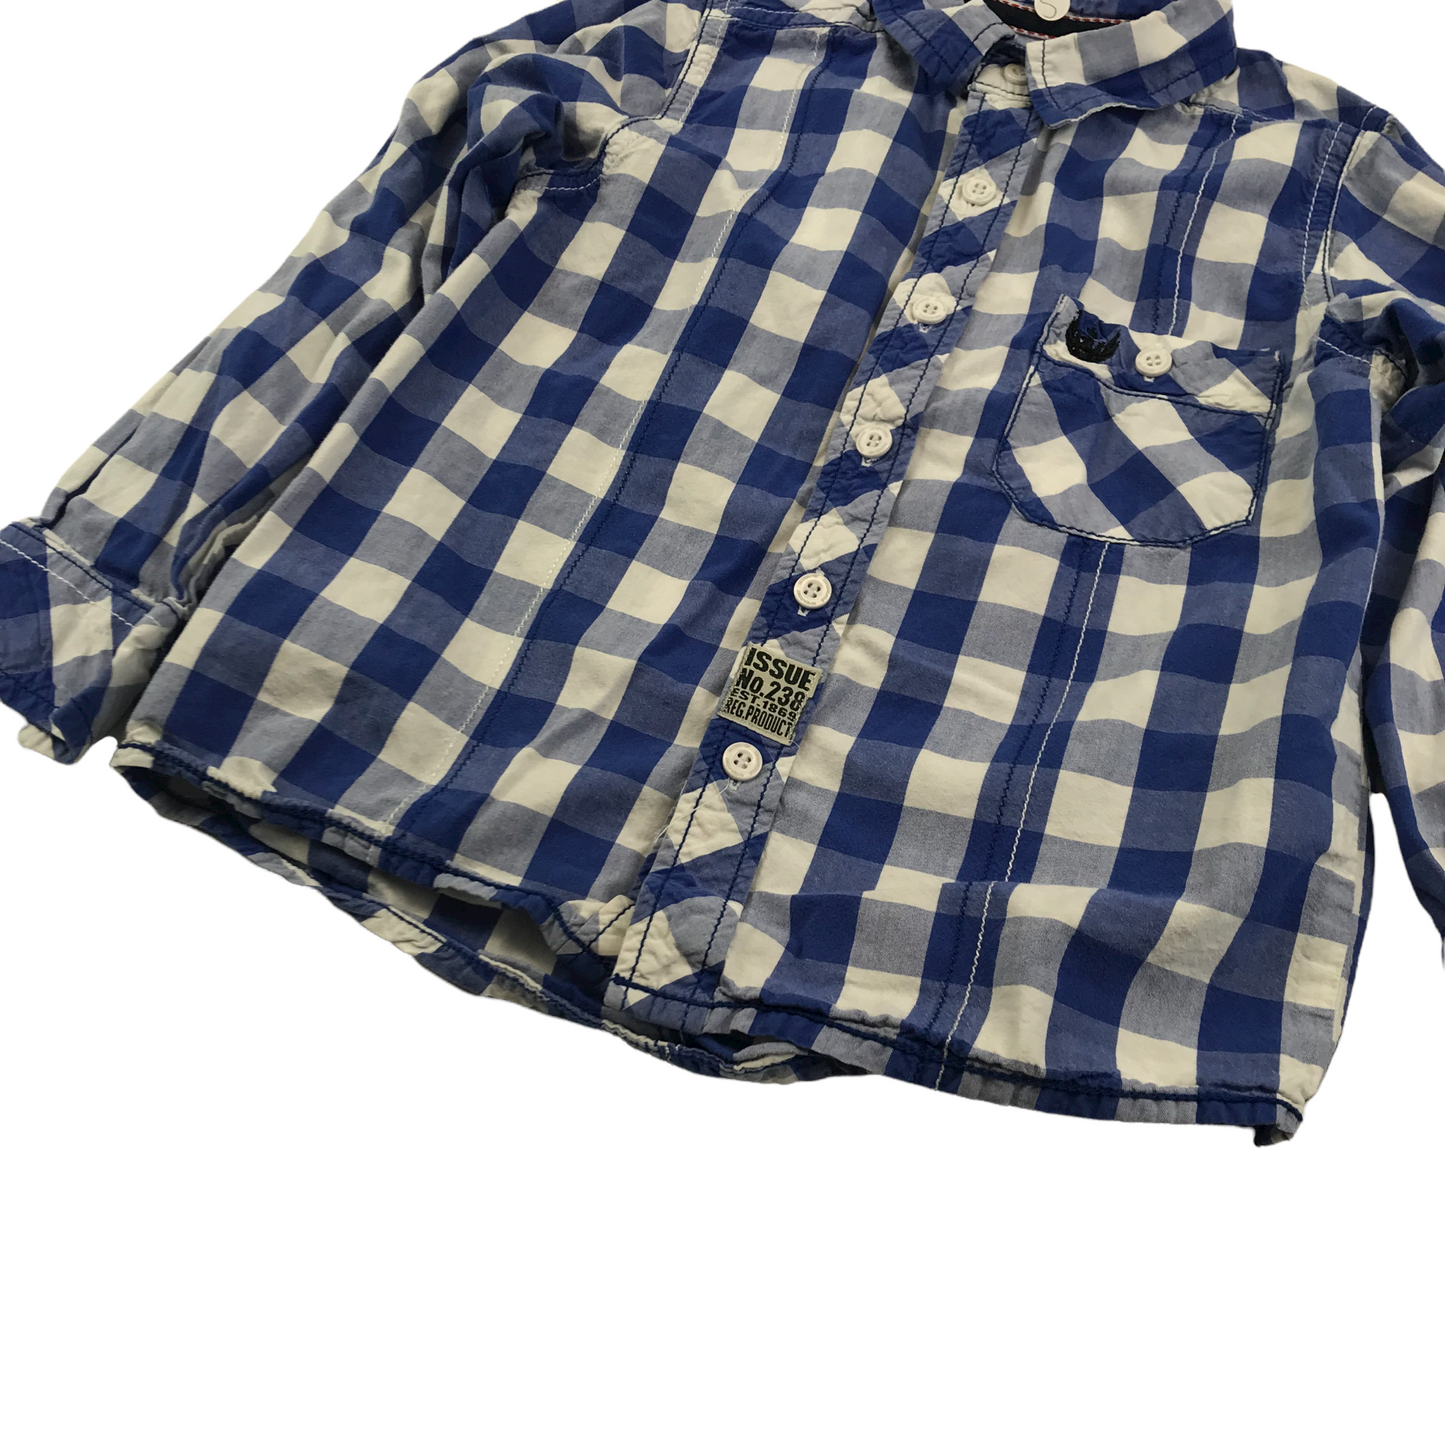 Tu Blue and White Checked Shirt Age 5